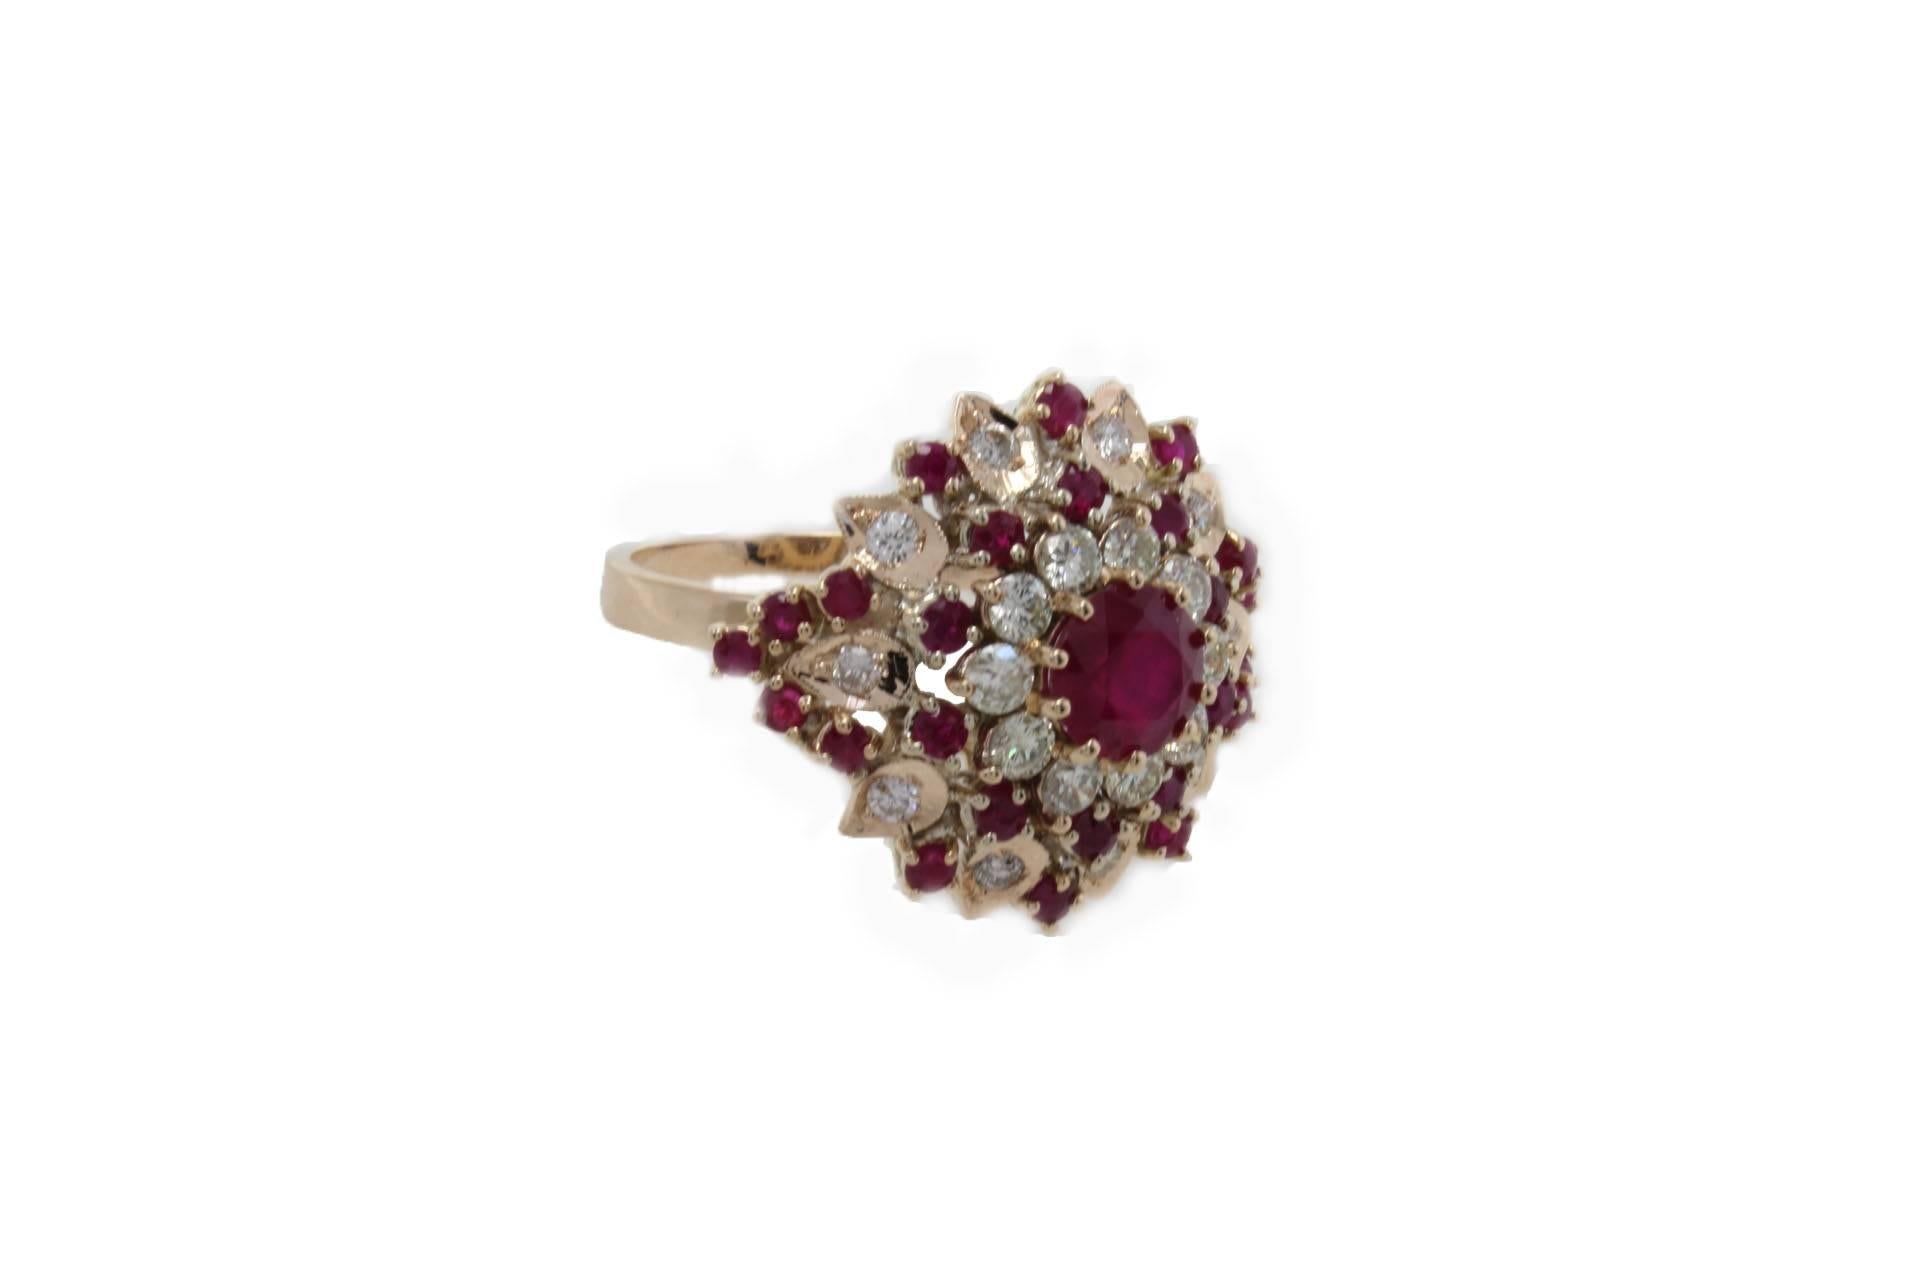 shipping policy: 
No additional costs will be added to this order.
Shipping costs will be totally covered by the seller (customs duties included). 

Charming ring in 14Kt gold composed of a ruby in the center surrounded by diamonds and